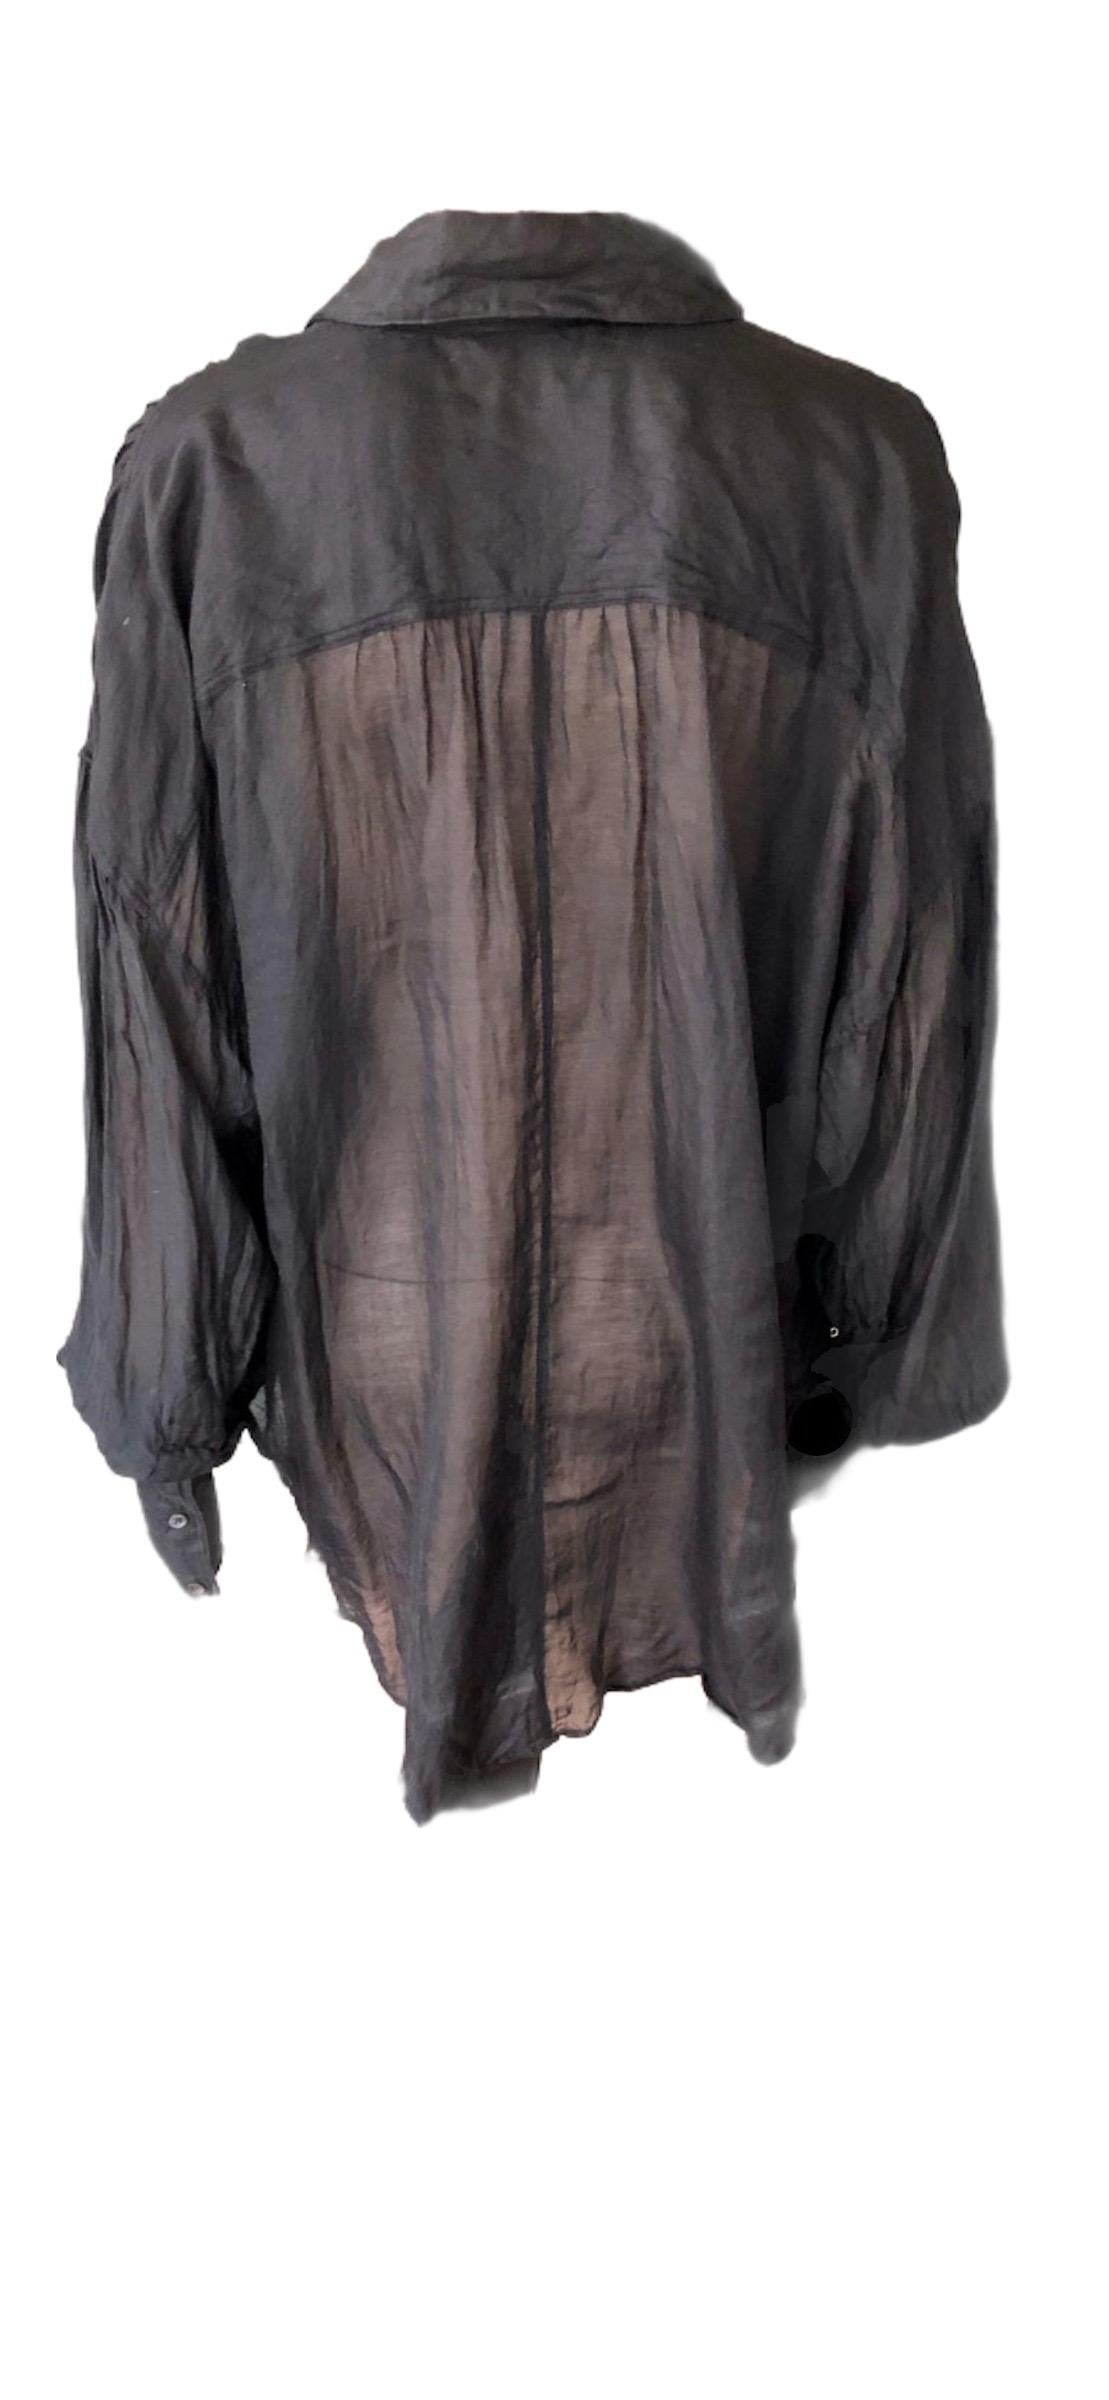 Tom Ford for Gucci F/W 2002 Sheer Plunging Lace-Up Black Tunic Shirt ...